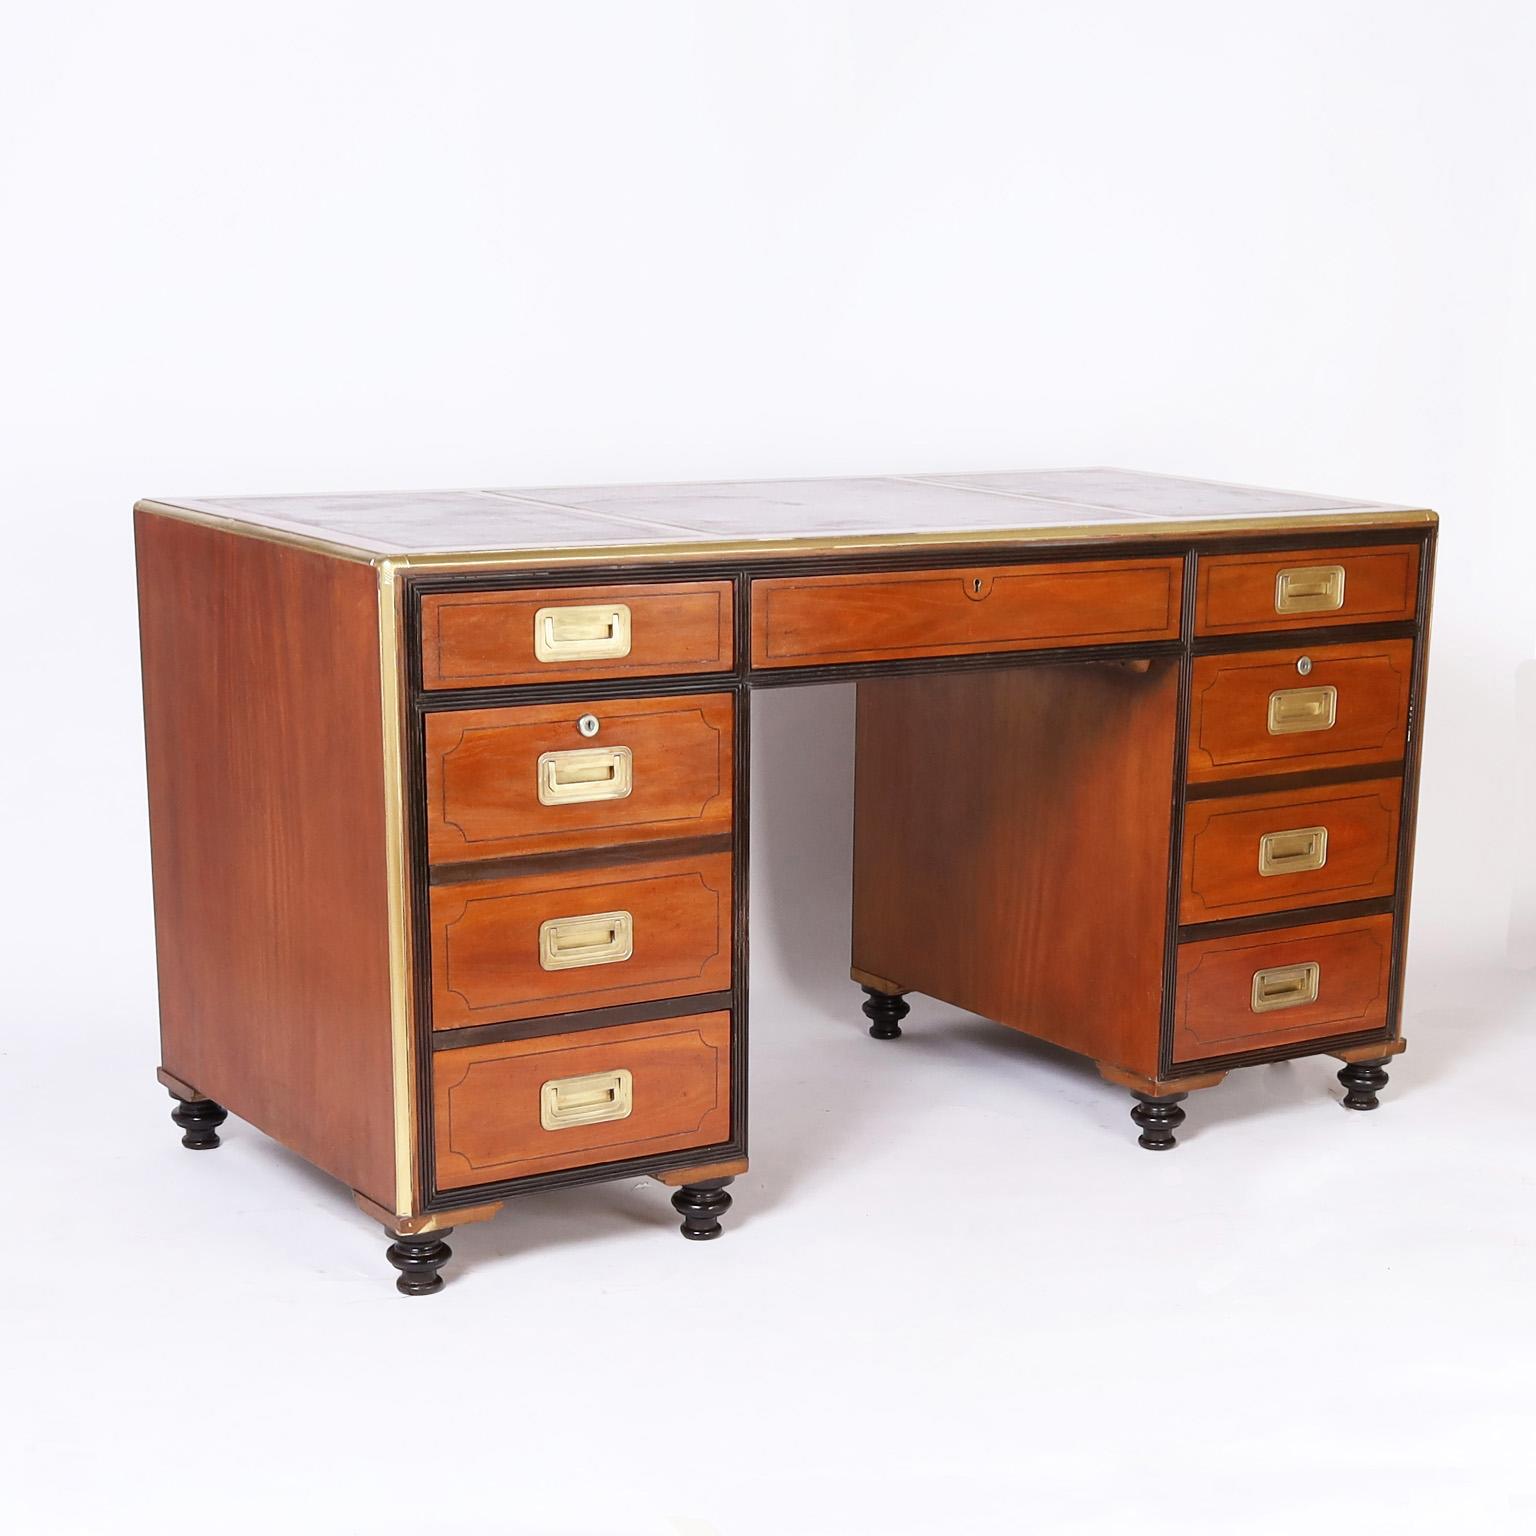 With a perfect blend of modern and traditional this mahogany nine drawer desk has three tooled brown leather panels on top, a two toned case with ebonized trim, brass campaign hardware, open shelves on the back and turned feet. Signed Baker